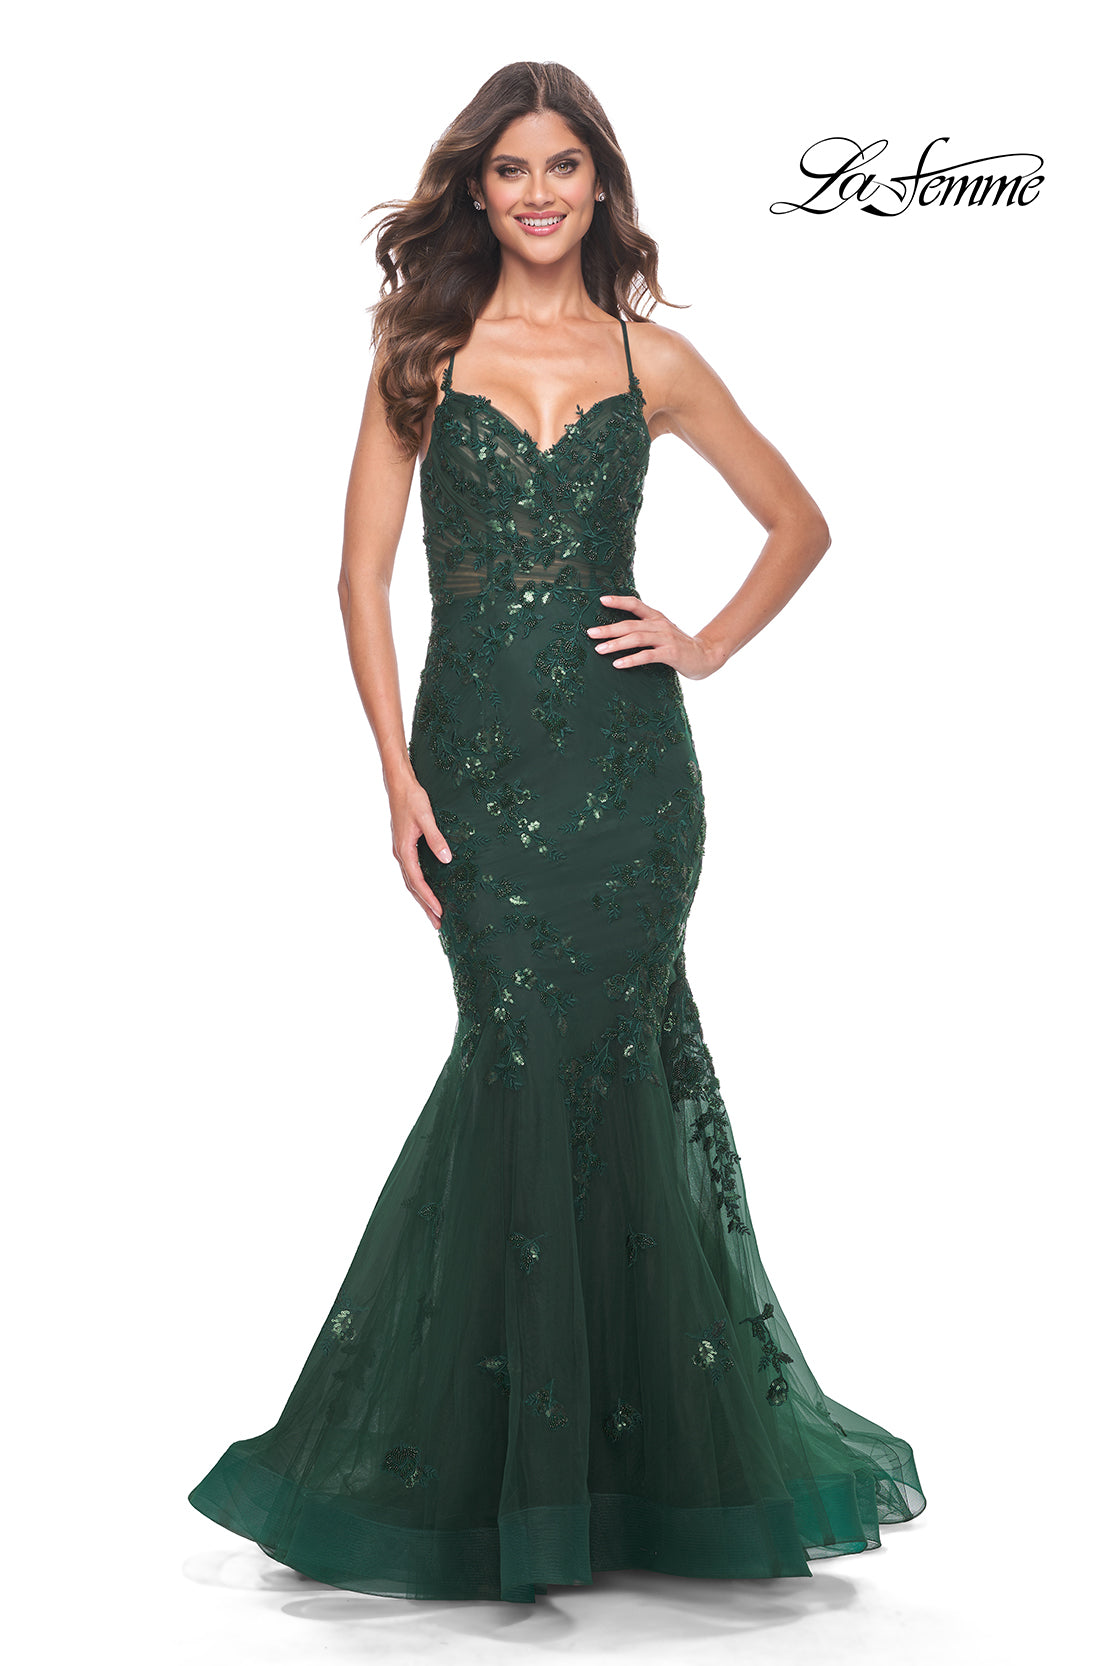 La-Femme-32033-V-Neck-Neckline-Corset-Lace-up-Back-Lace-Tulle-Mermaid-Fitted-Dark-Emerald-Evening-Dress-B-Chic-Fashions-Prom-Dress